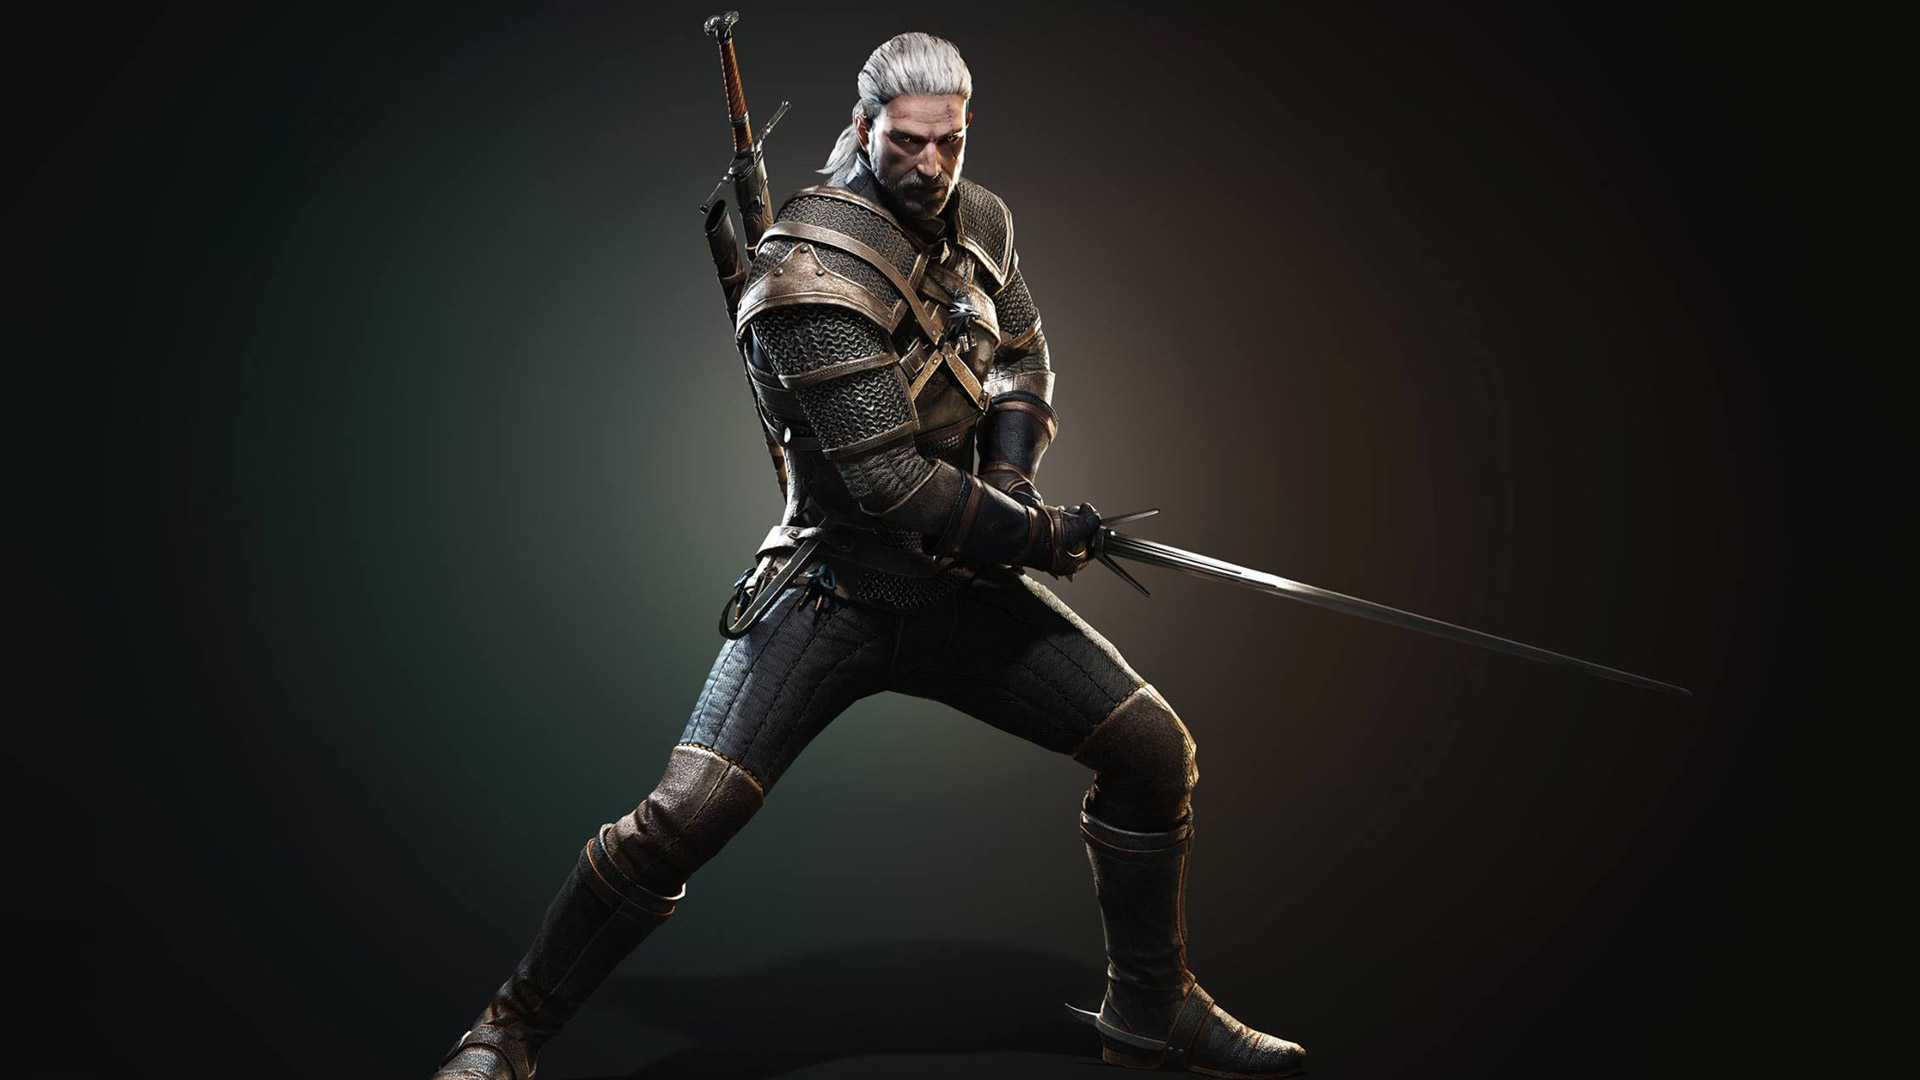 The Witcher Wallpaper In